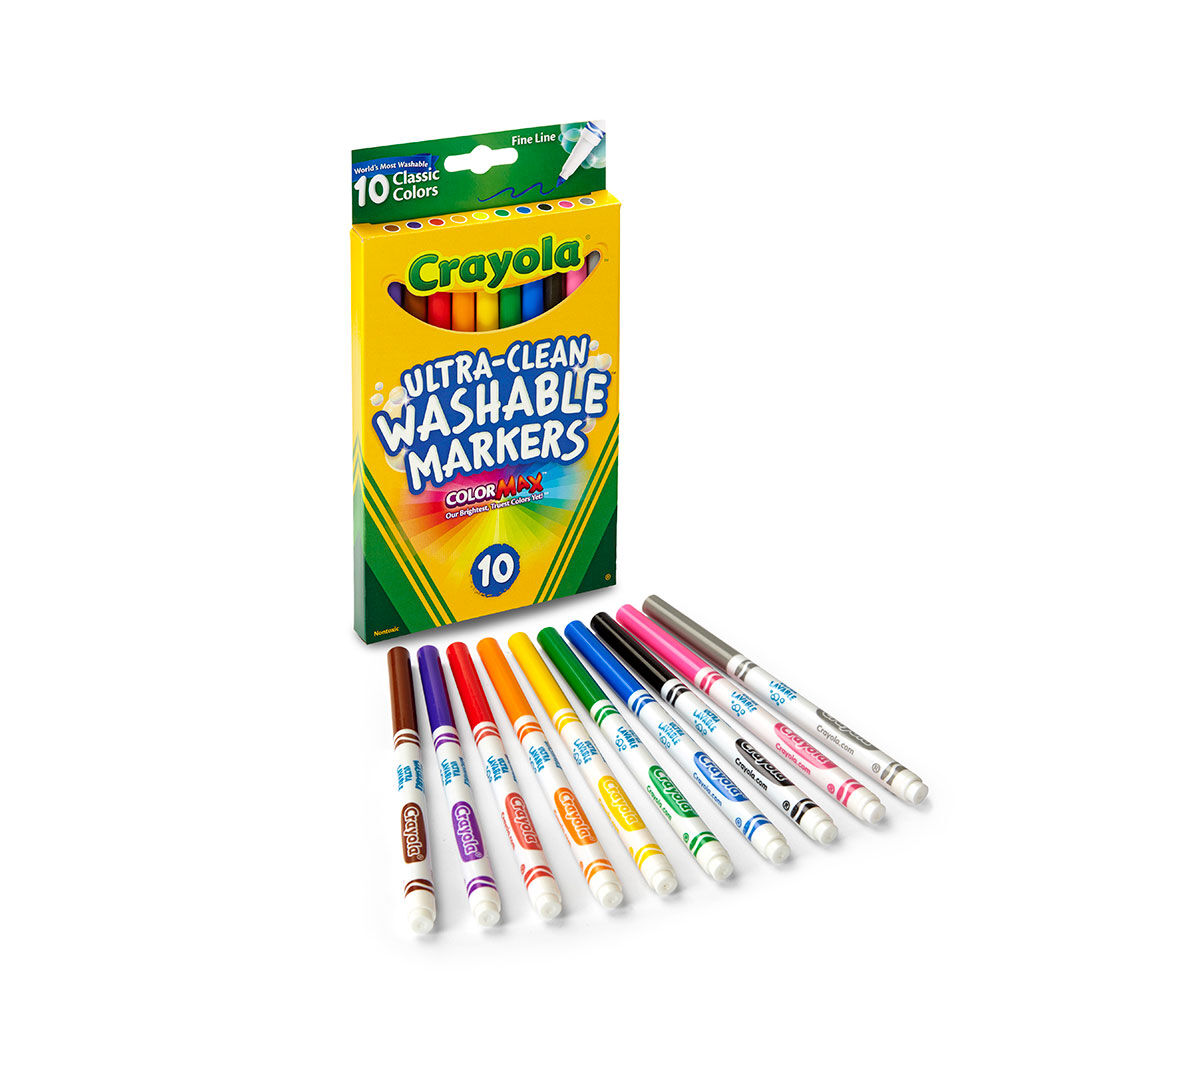 Crayola Ultraclean Fineline Classic Markers 3-Pack 10 Count